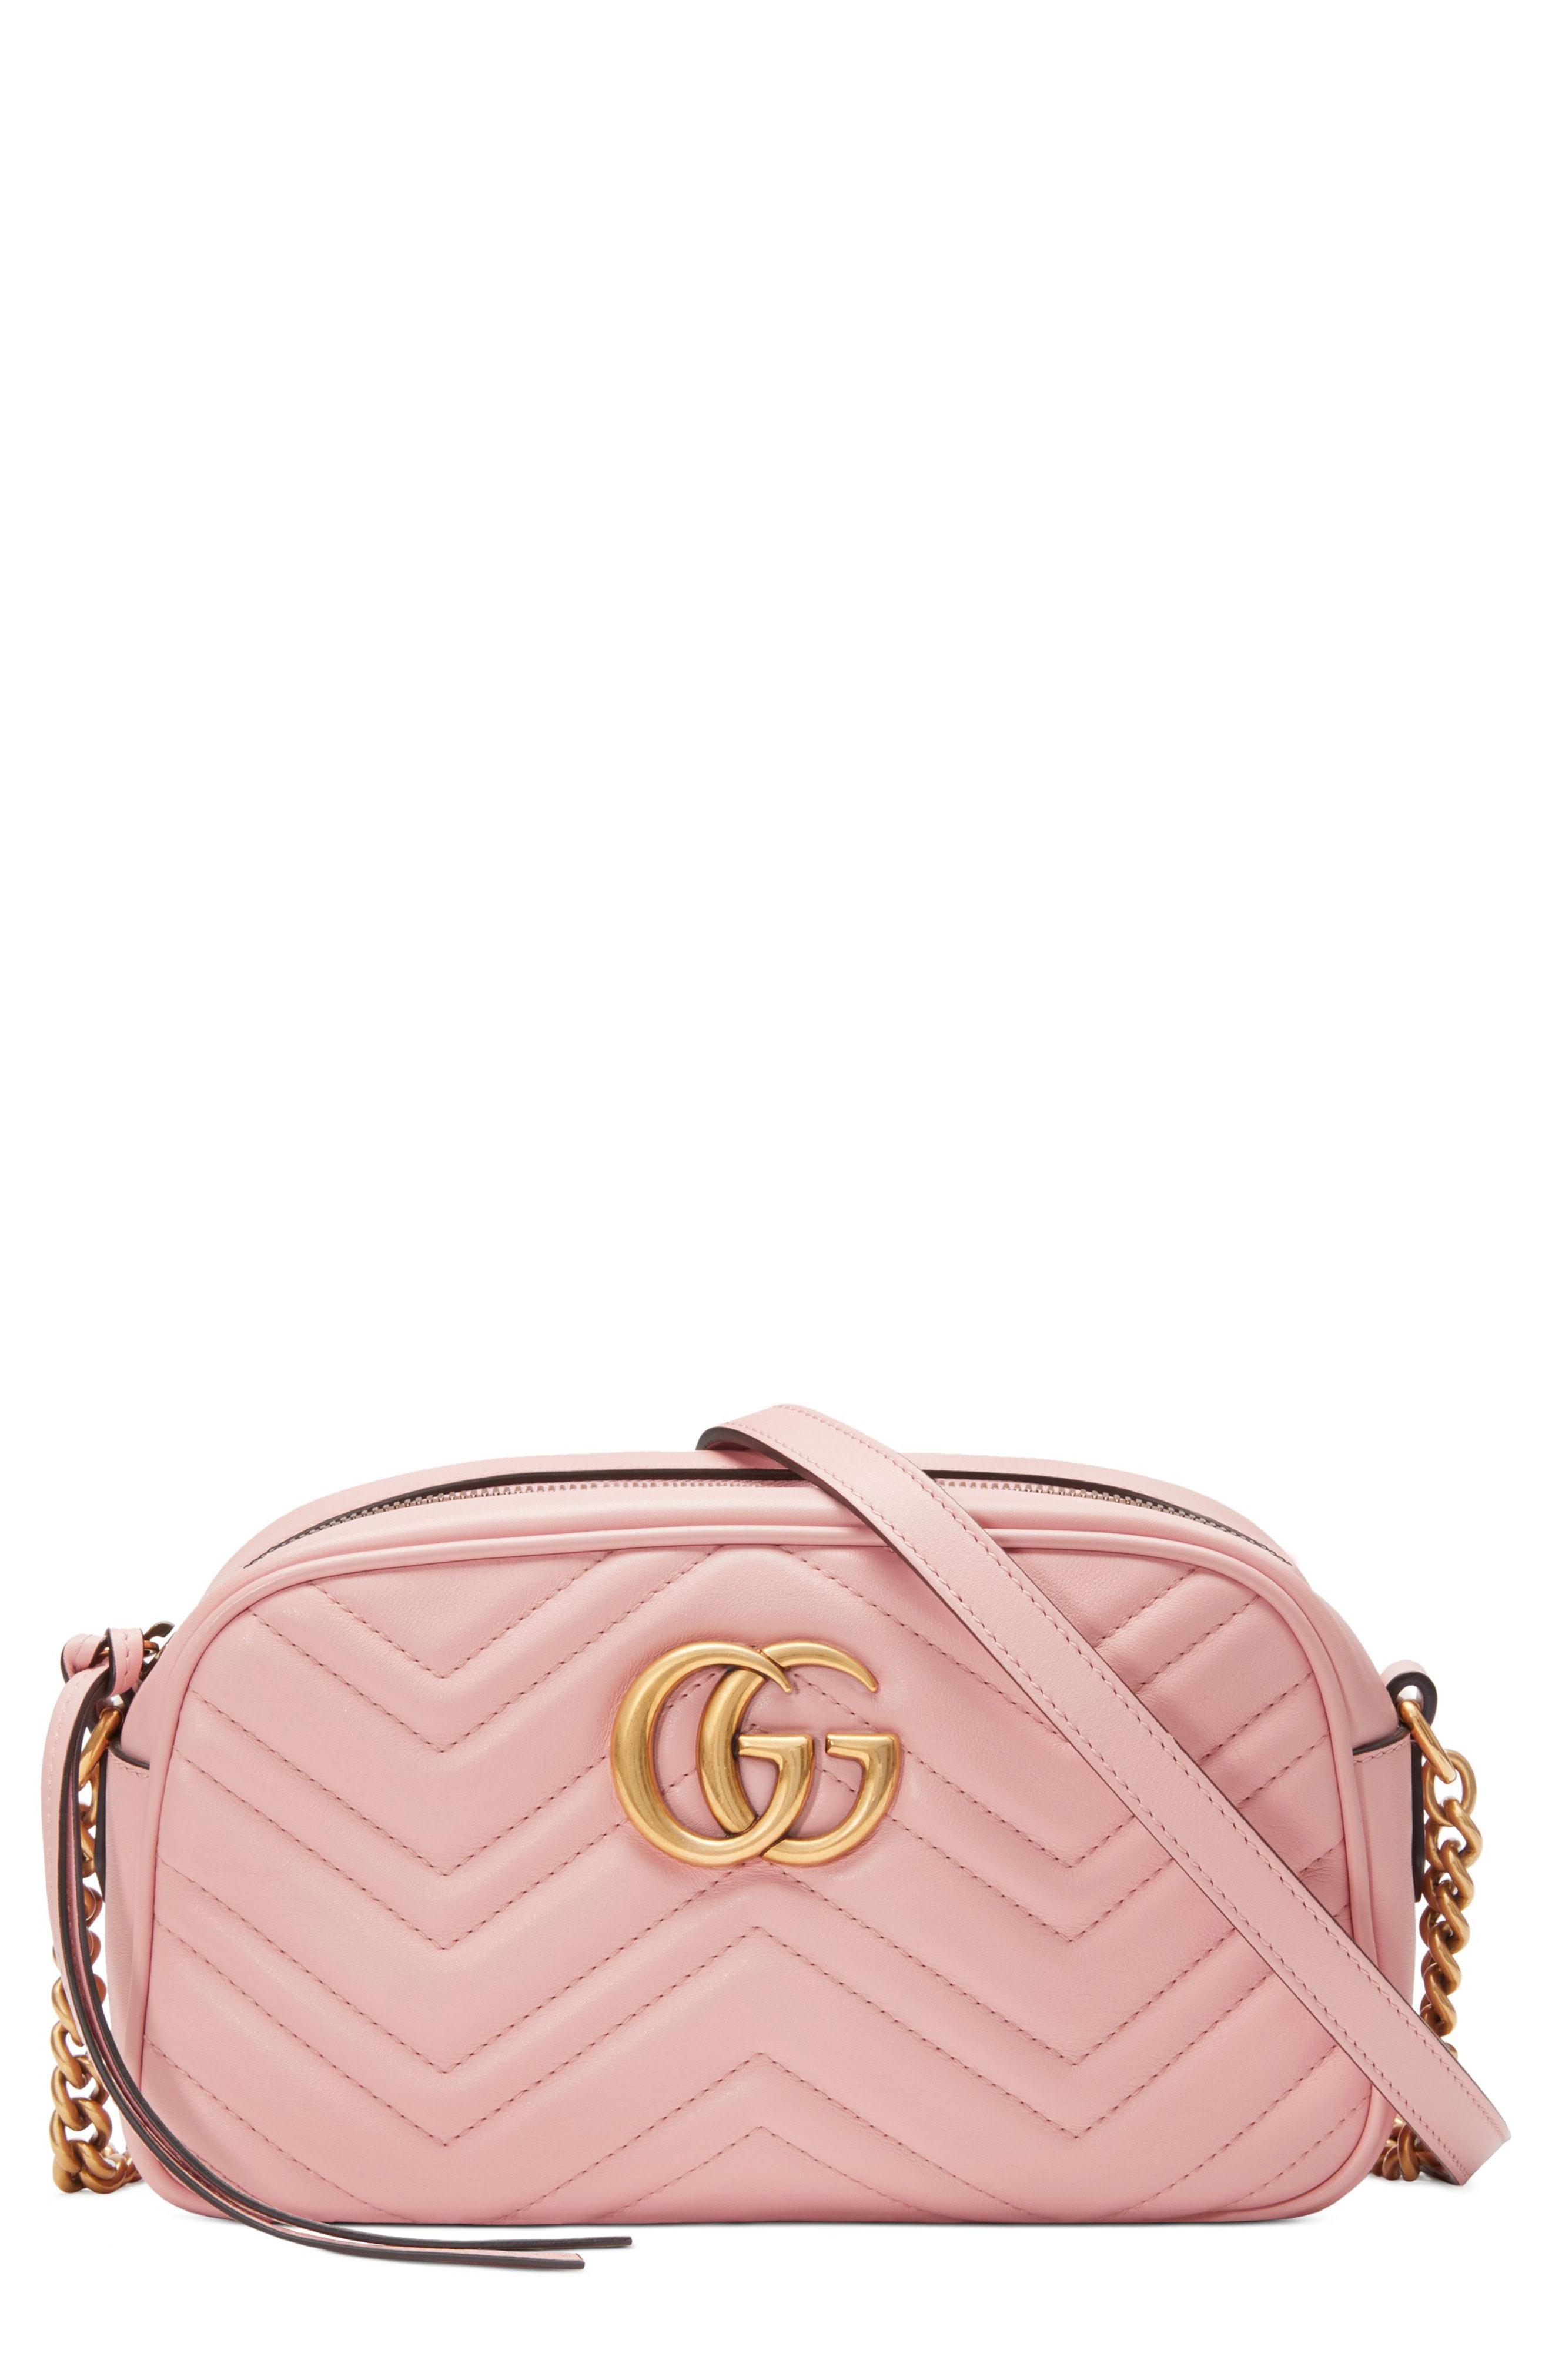 Gucci Small Gg Marmont 2.0 Matelasse Leather Camera Bag in Pink - Lyst